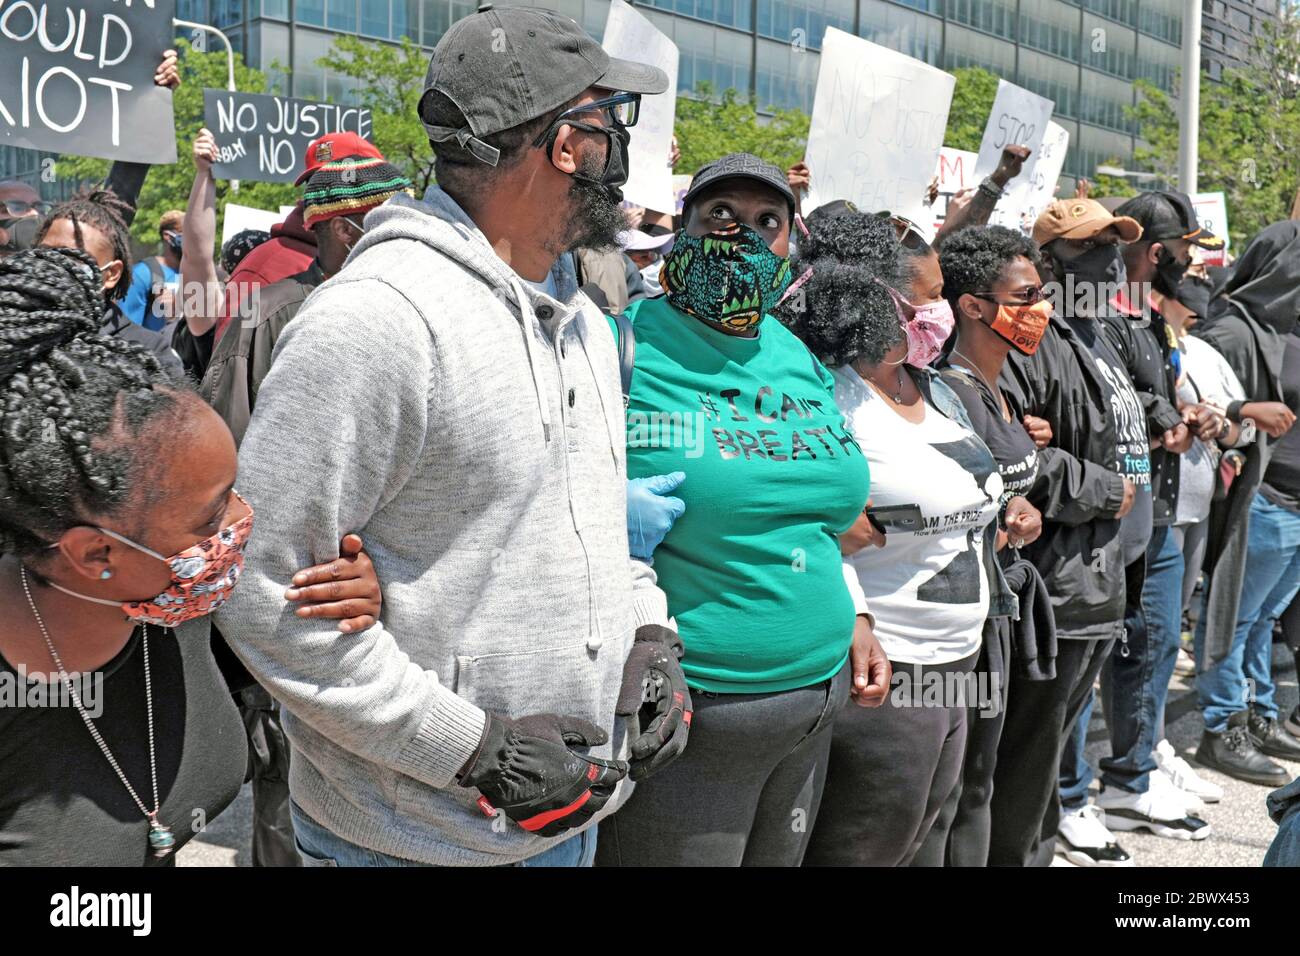 Protesters prepare to march in downtown Cleveland, Ohio, USA against the death of George Floyd at the hands of Minneapolis police. Stock Photo